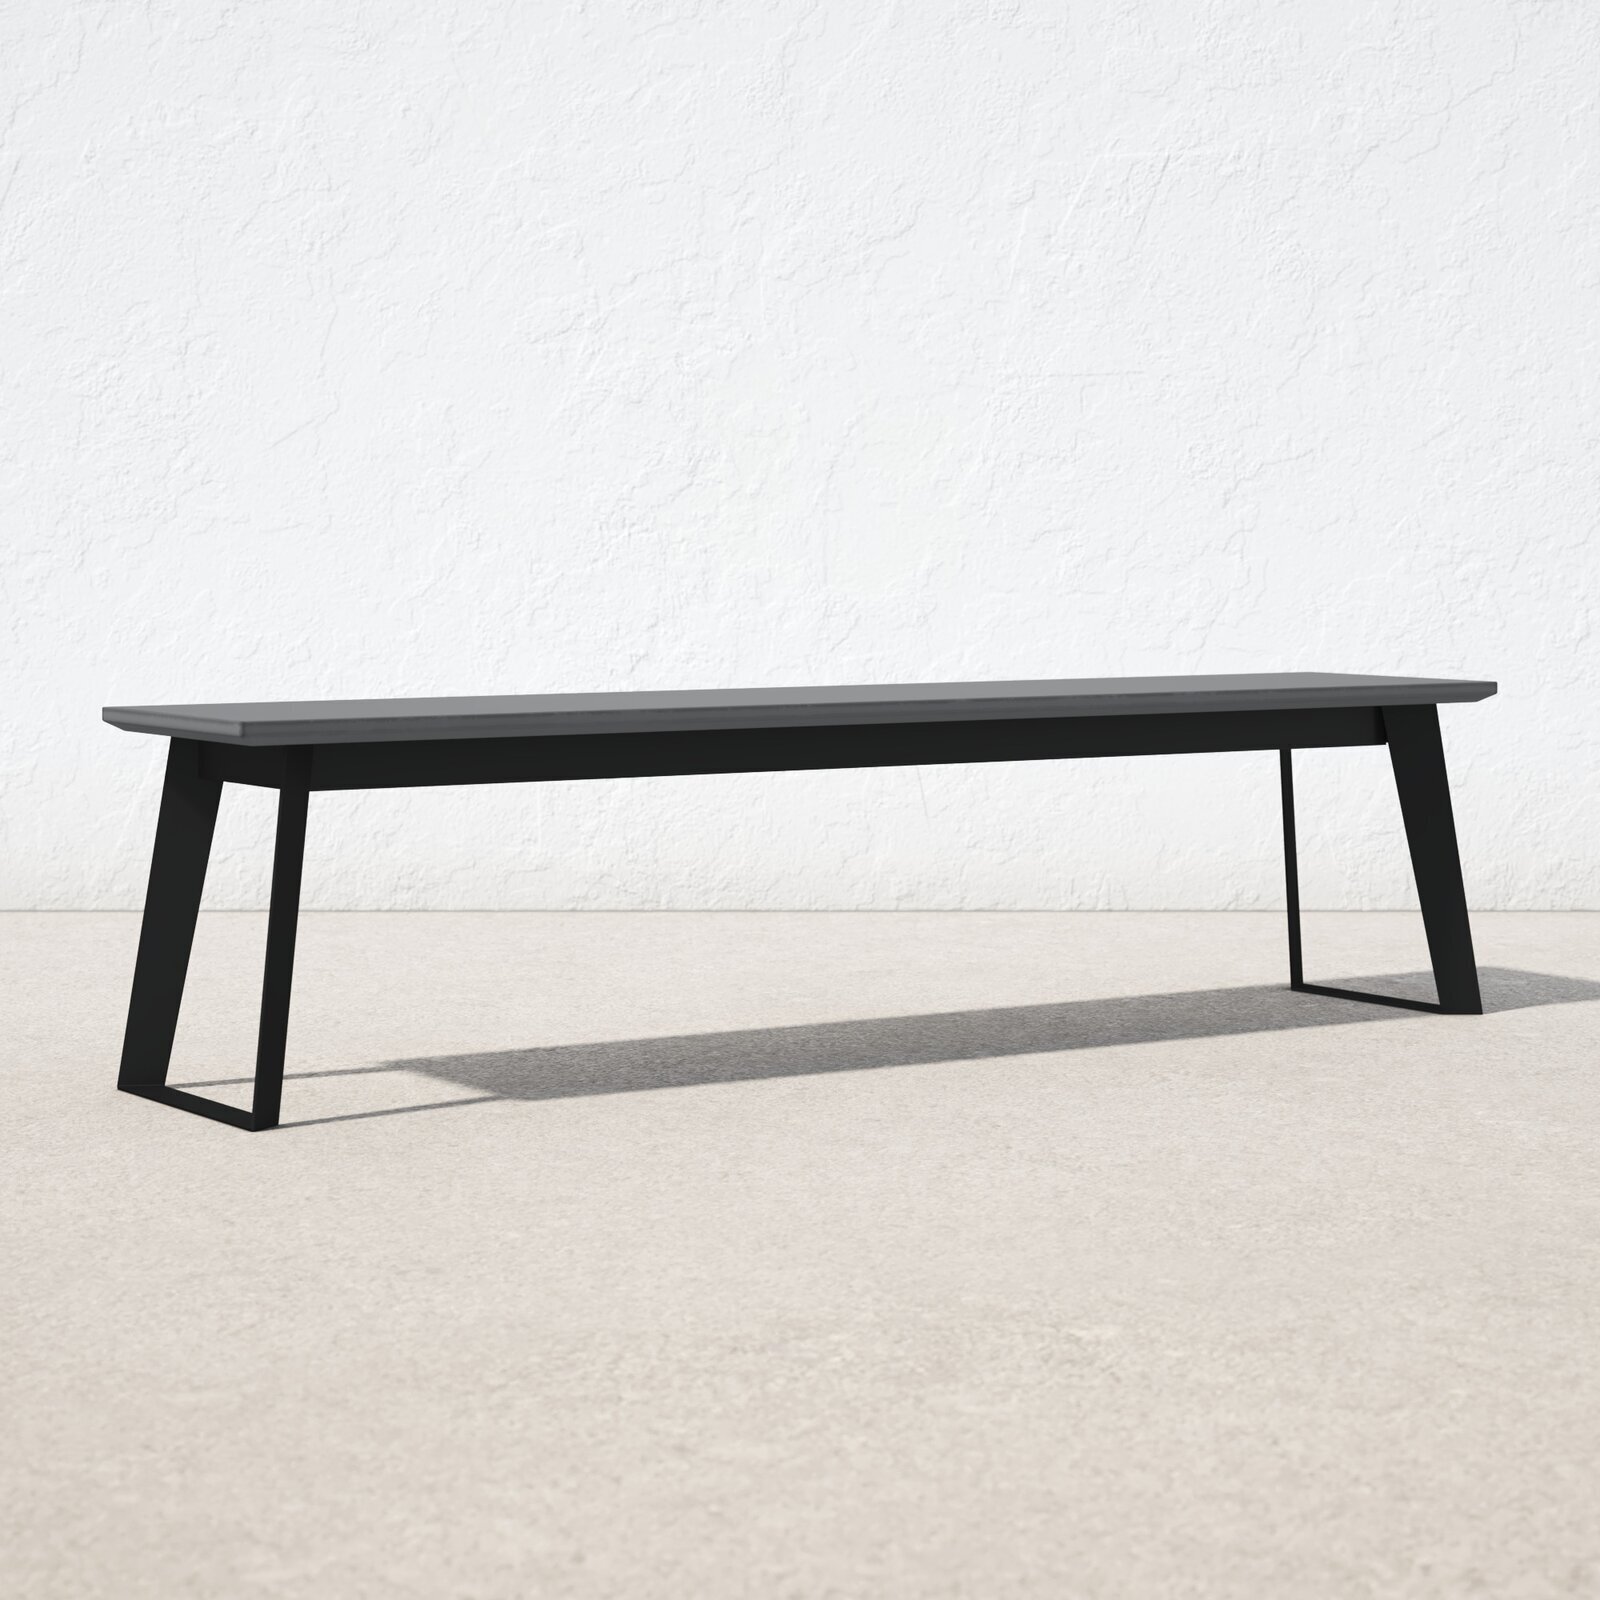 Sleek modern outdoor bench with a low profile